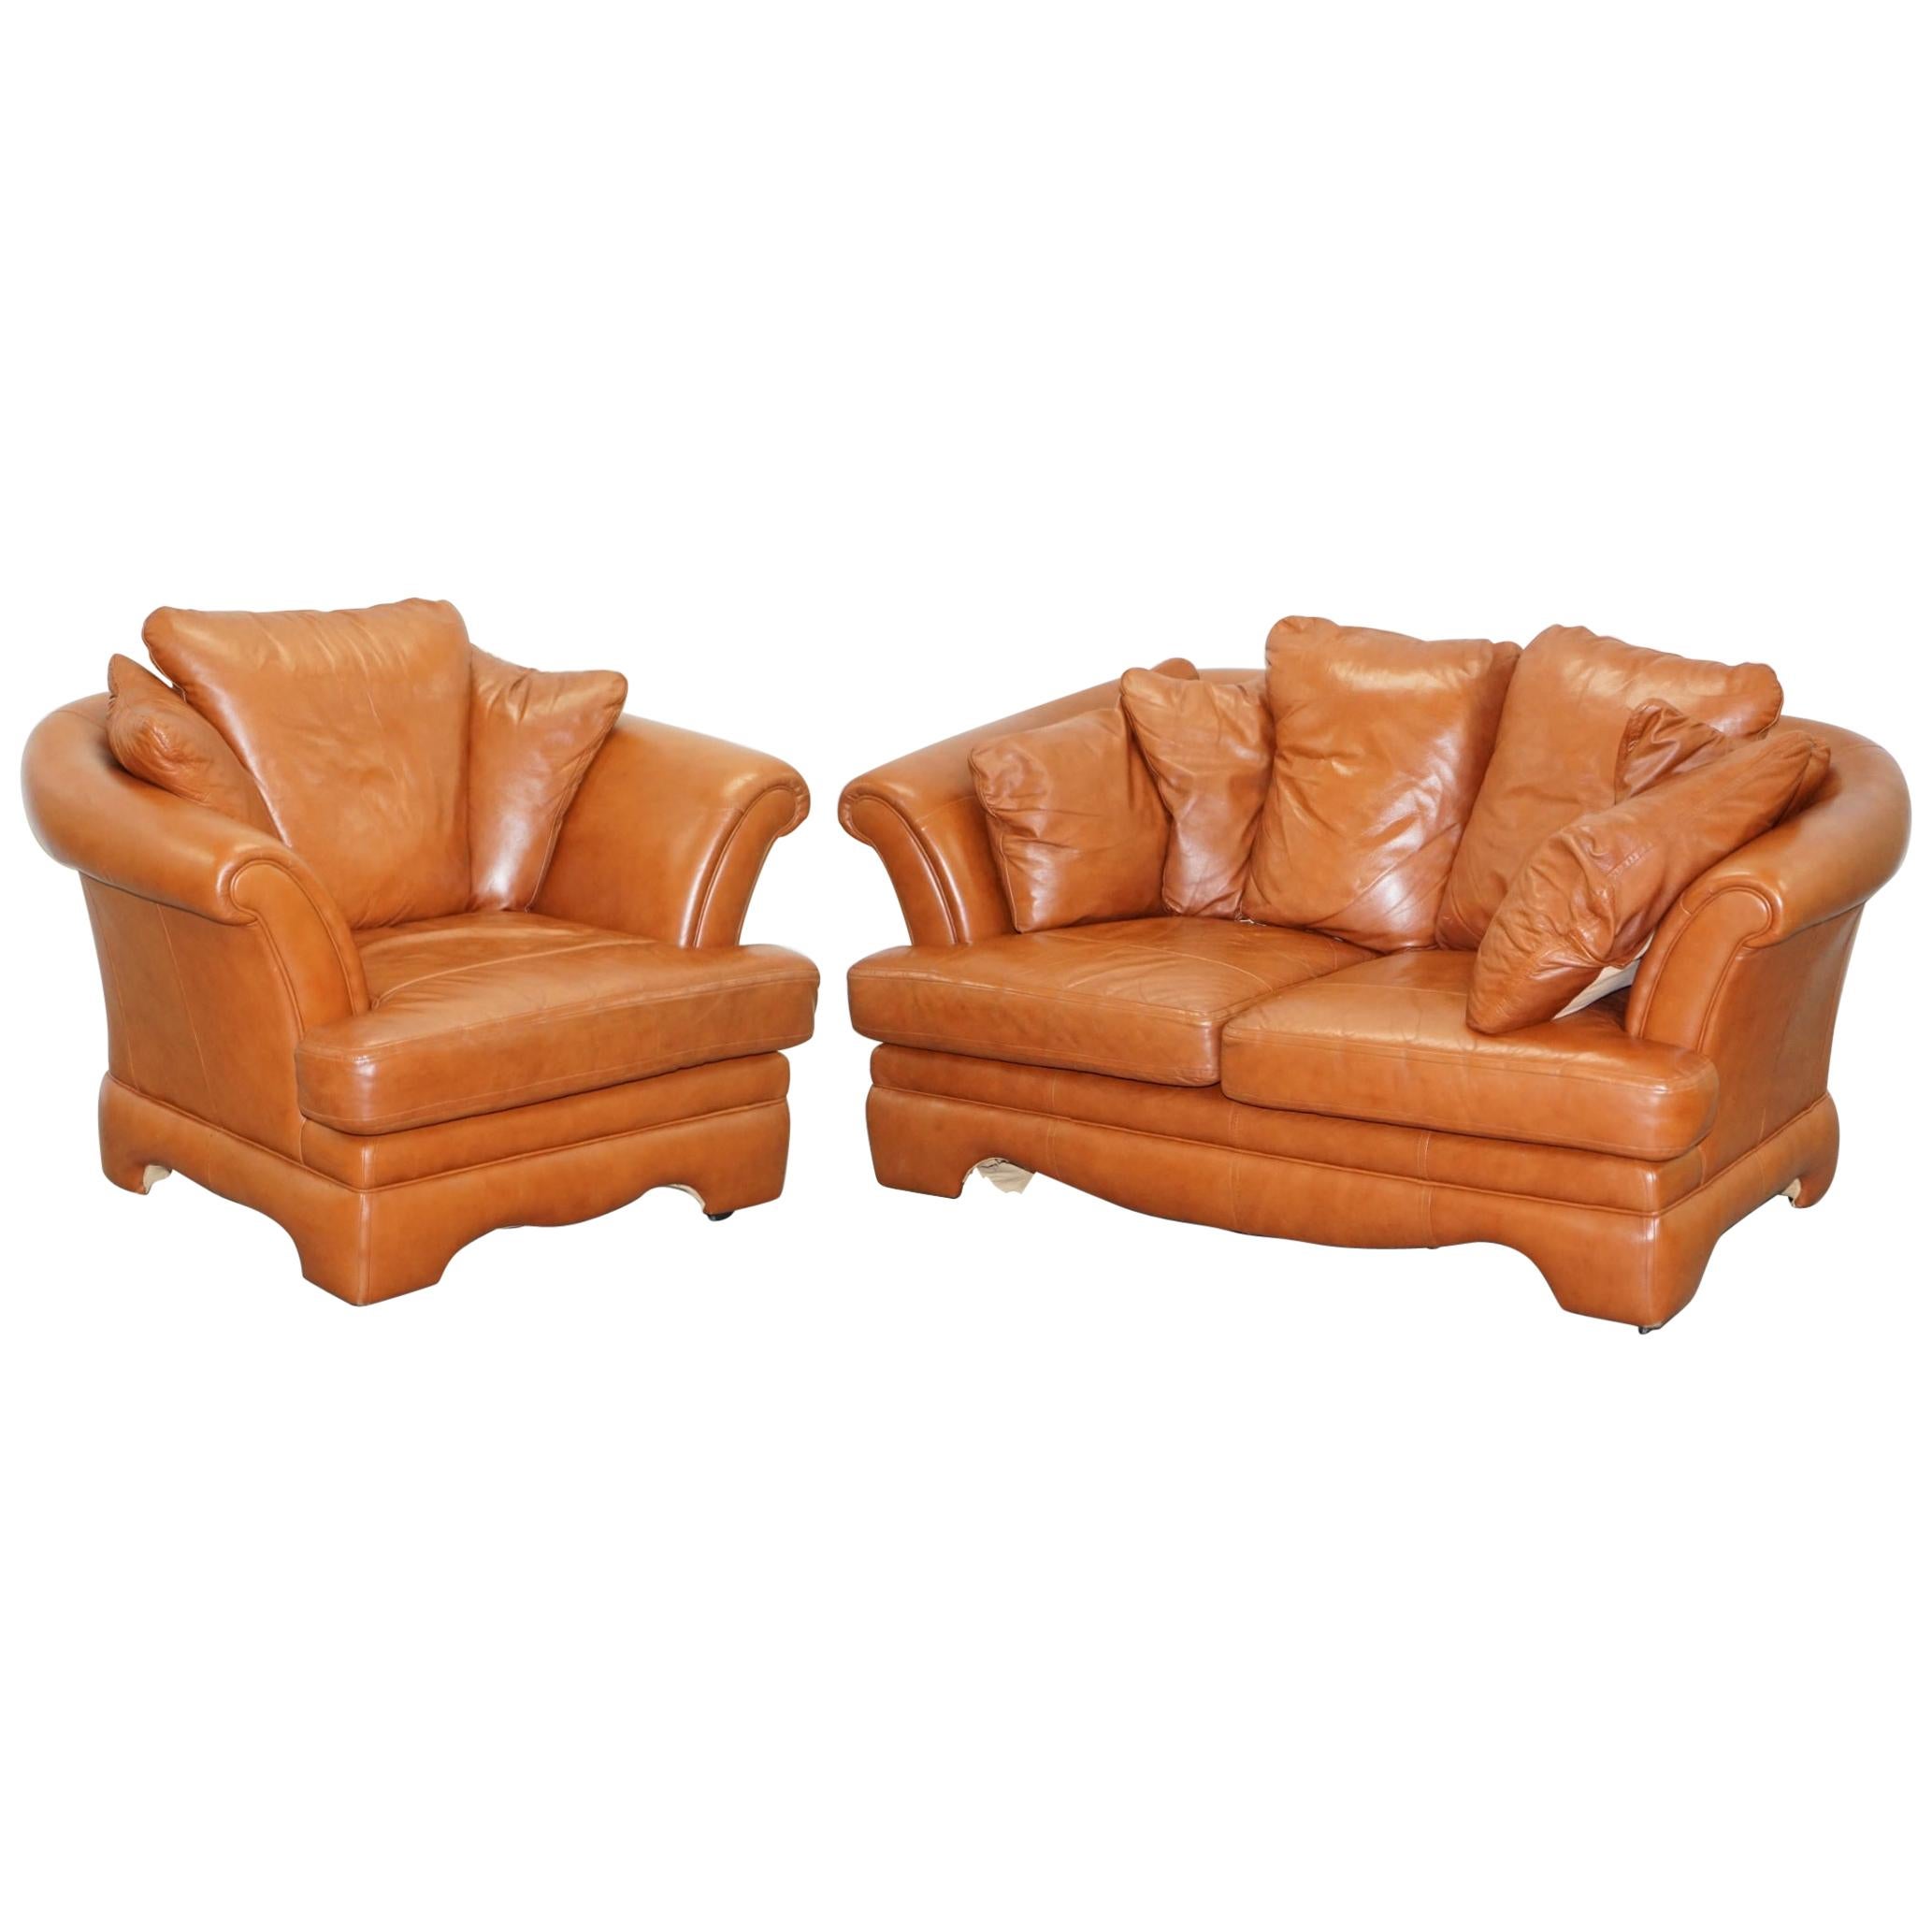 Lovely Small Aged Tan Brown Leather Sofa and Matching Armchair Two-Piece Suite For Sale